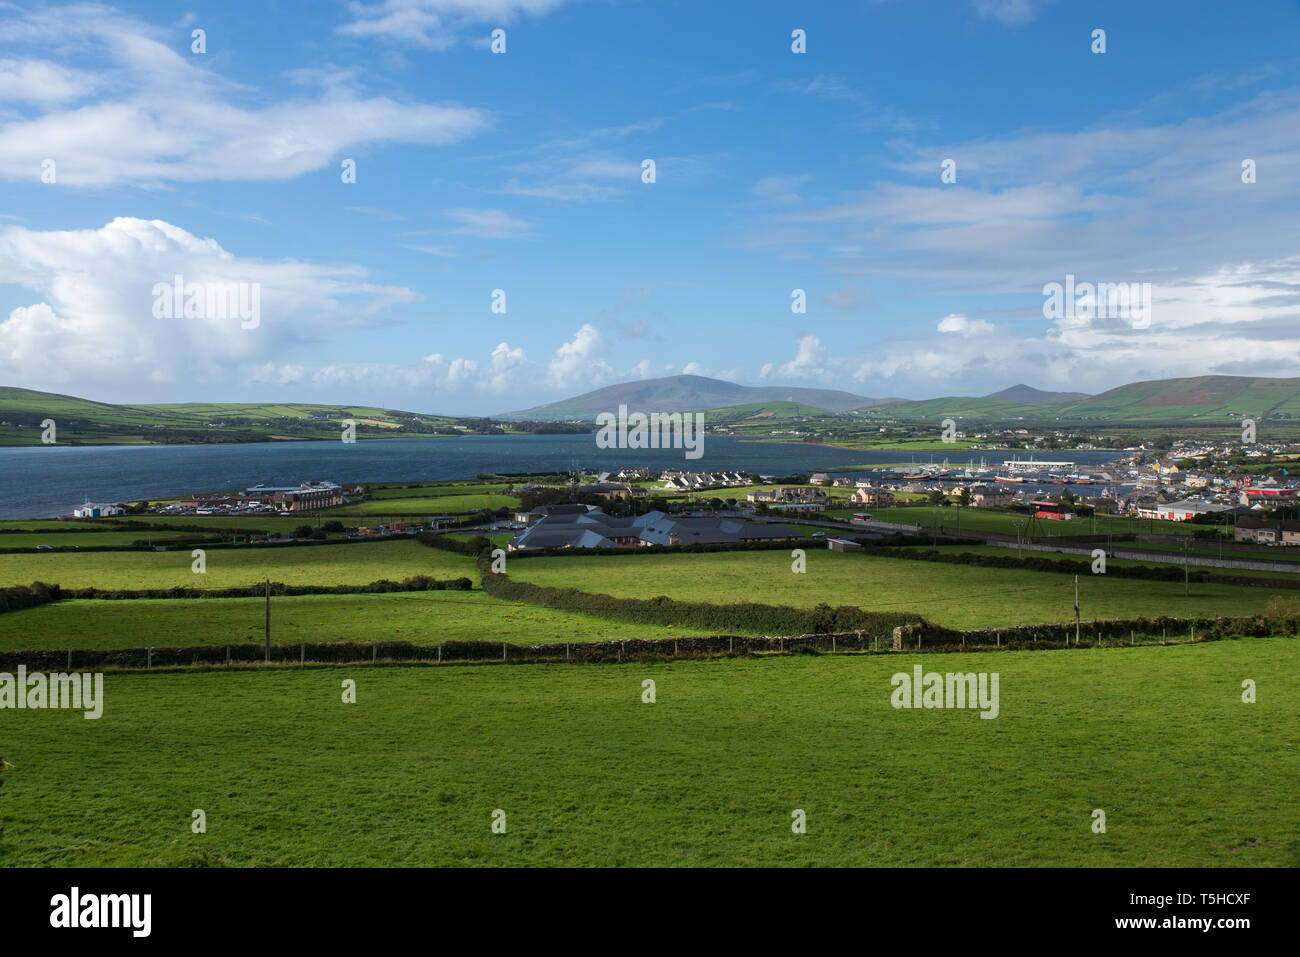 Dingle bay and the village of Dingle (a fishing harbour with 2,000 inhabitants) in West Kerry, Ireland. Stock Photo